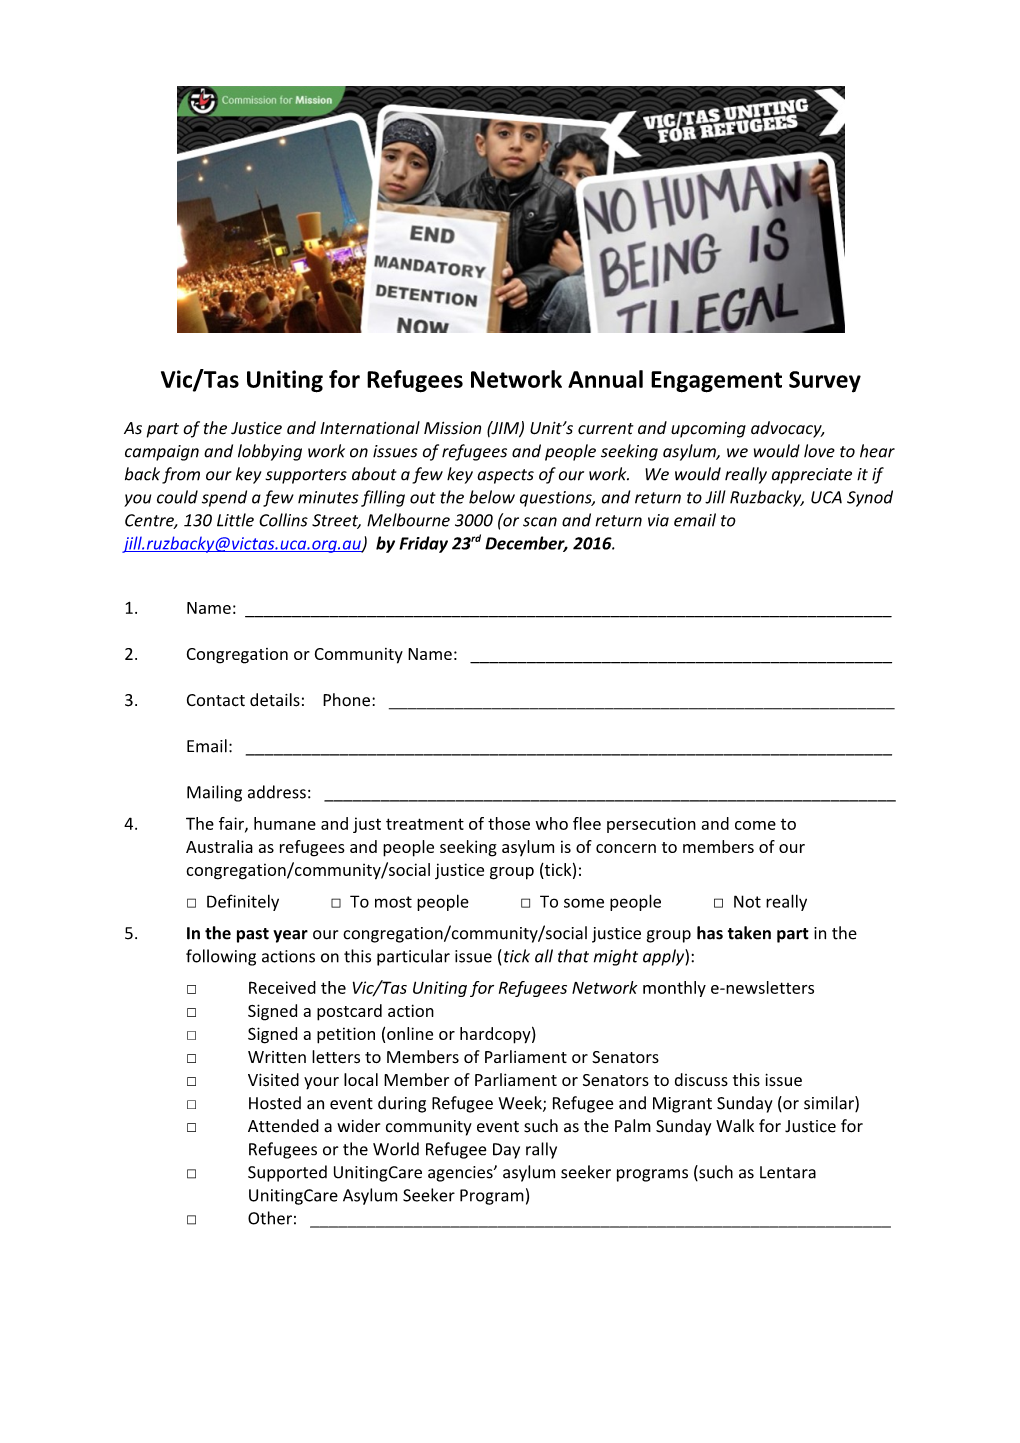 Vic/Tas Uniting for Refugees Network Annual Engagement Survey